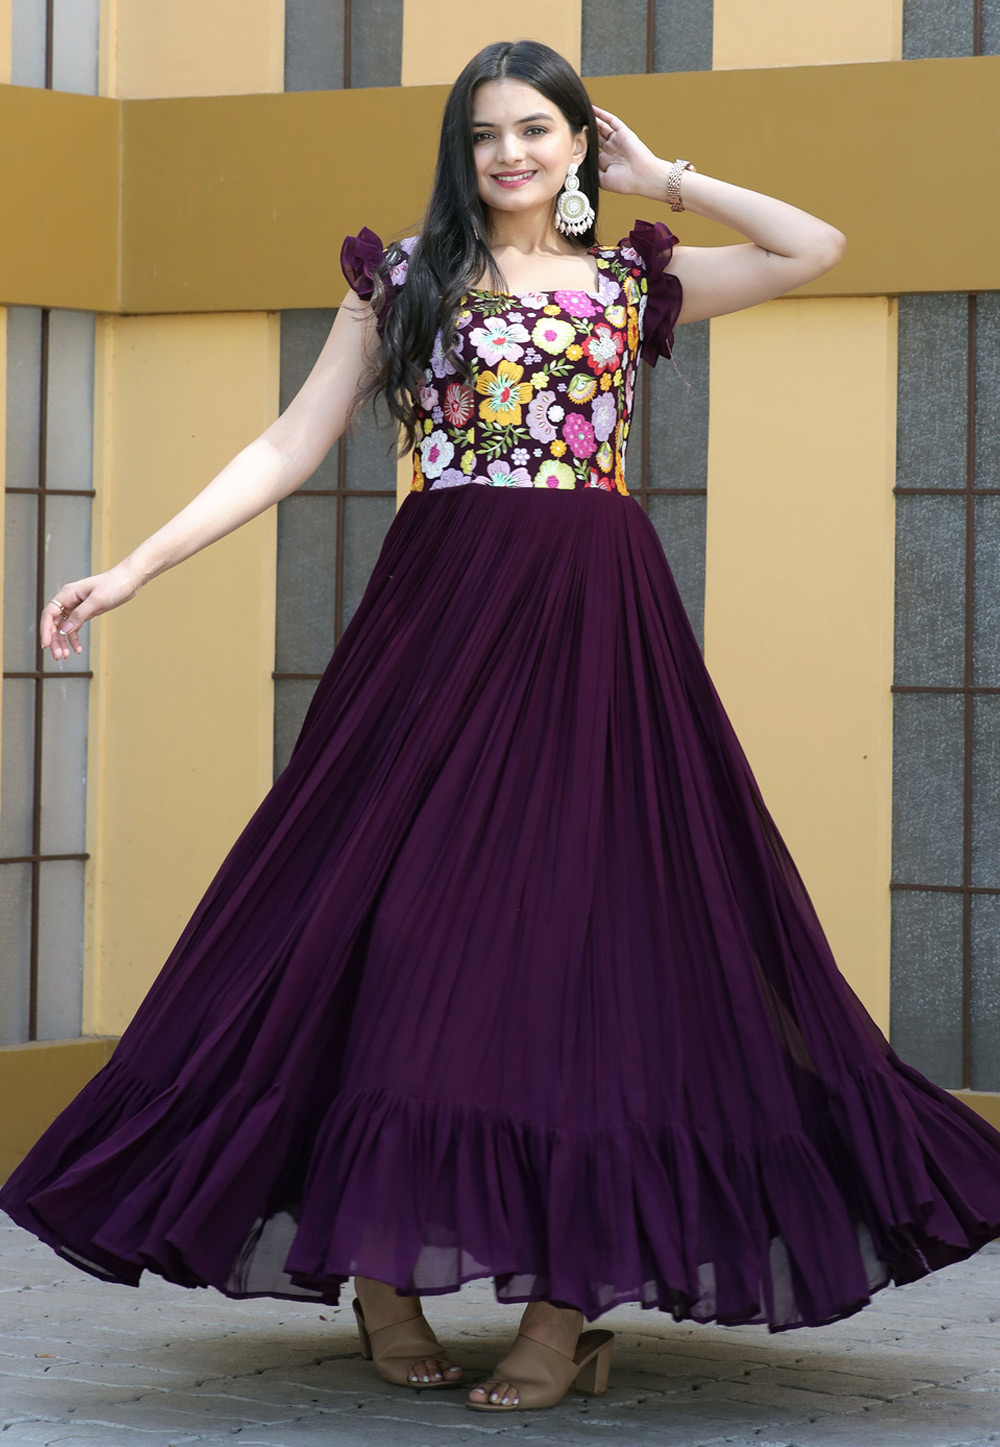 Buy Deep Wine Latest Designer Party Wear Real Georgette Gown Suit